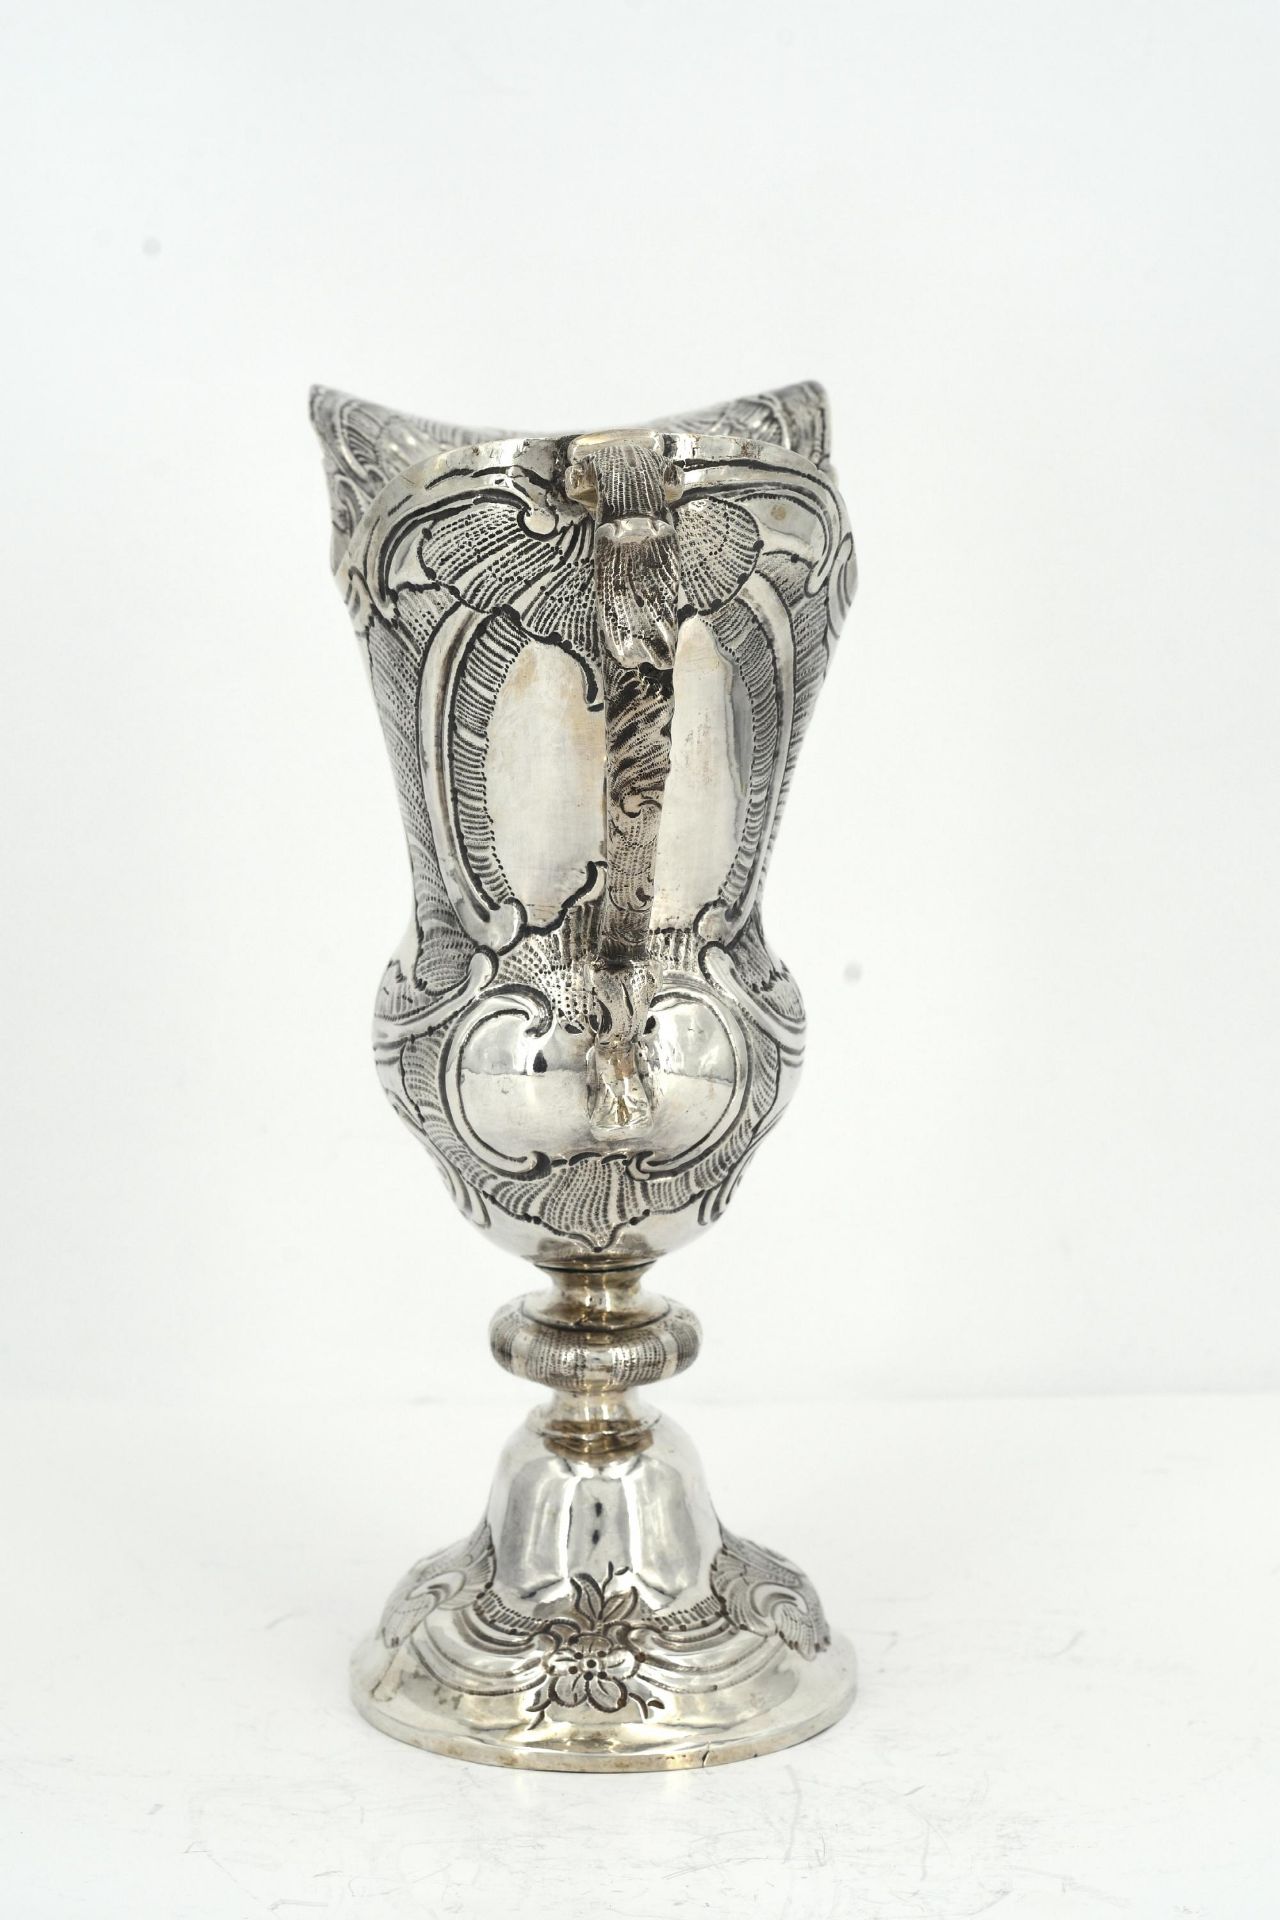 Silver helmet shaped jug with rocaille décor - Image 5 of 7